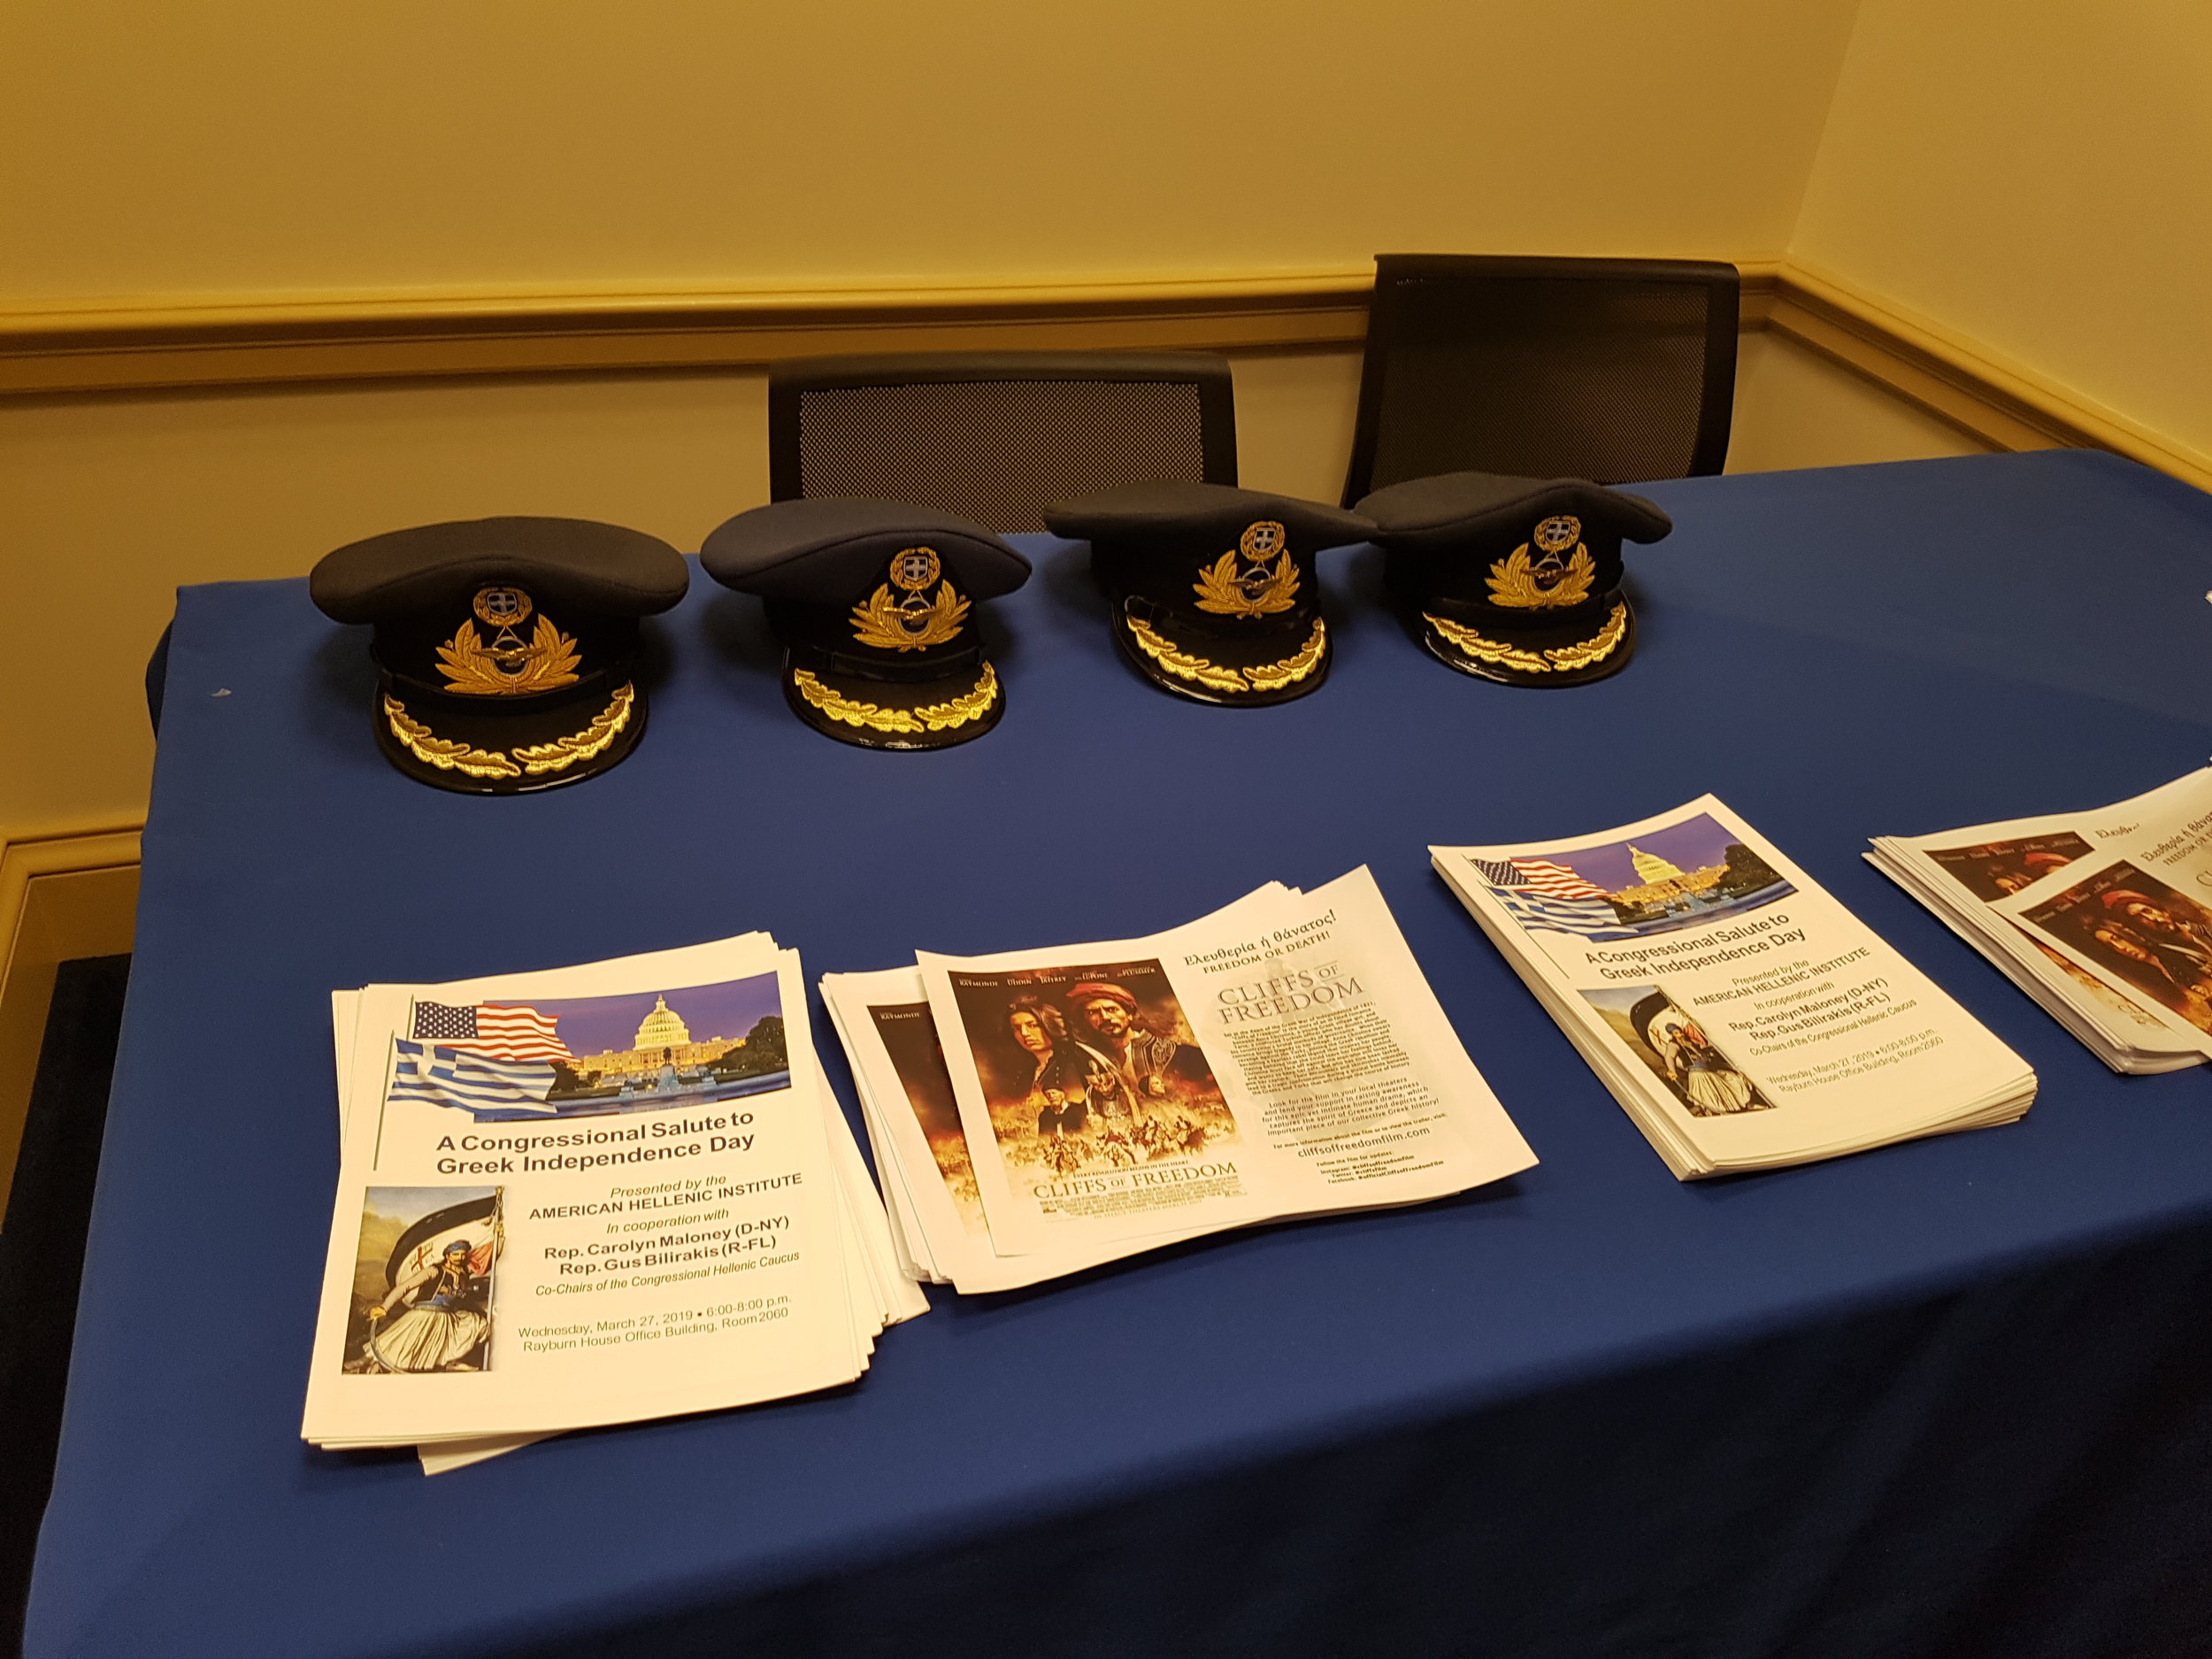  Hats Worn By Defense Attaches, Advertisements For The Film  Cliffs of Freedom , And Programs For The Congressional Salute To Greek Independence Day Event   